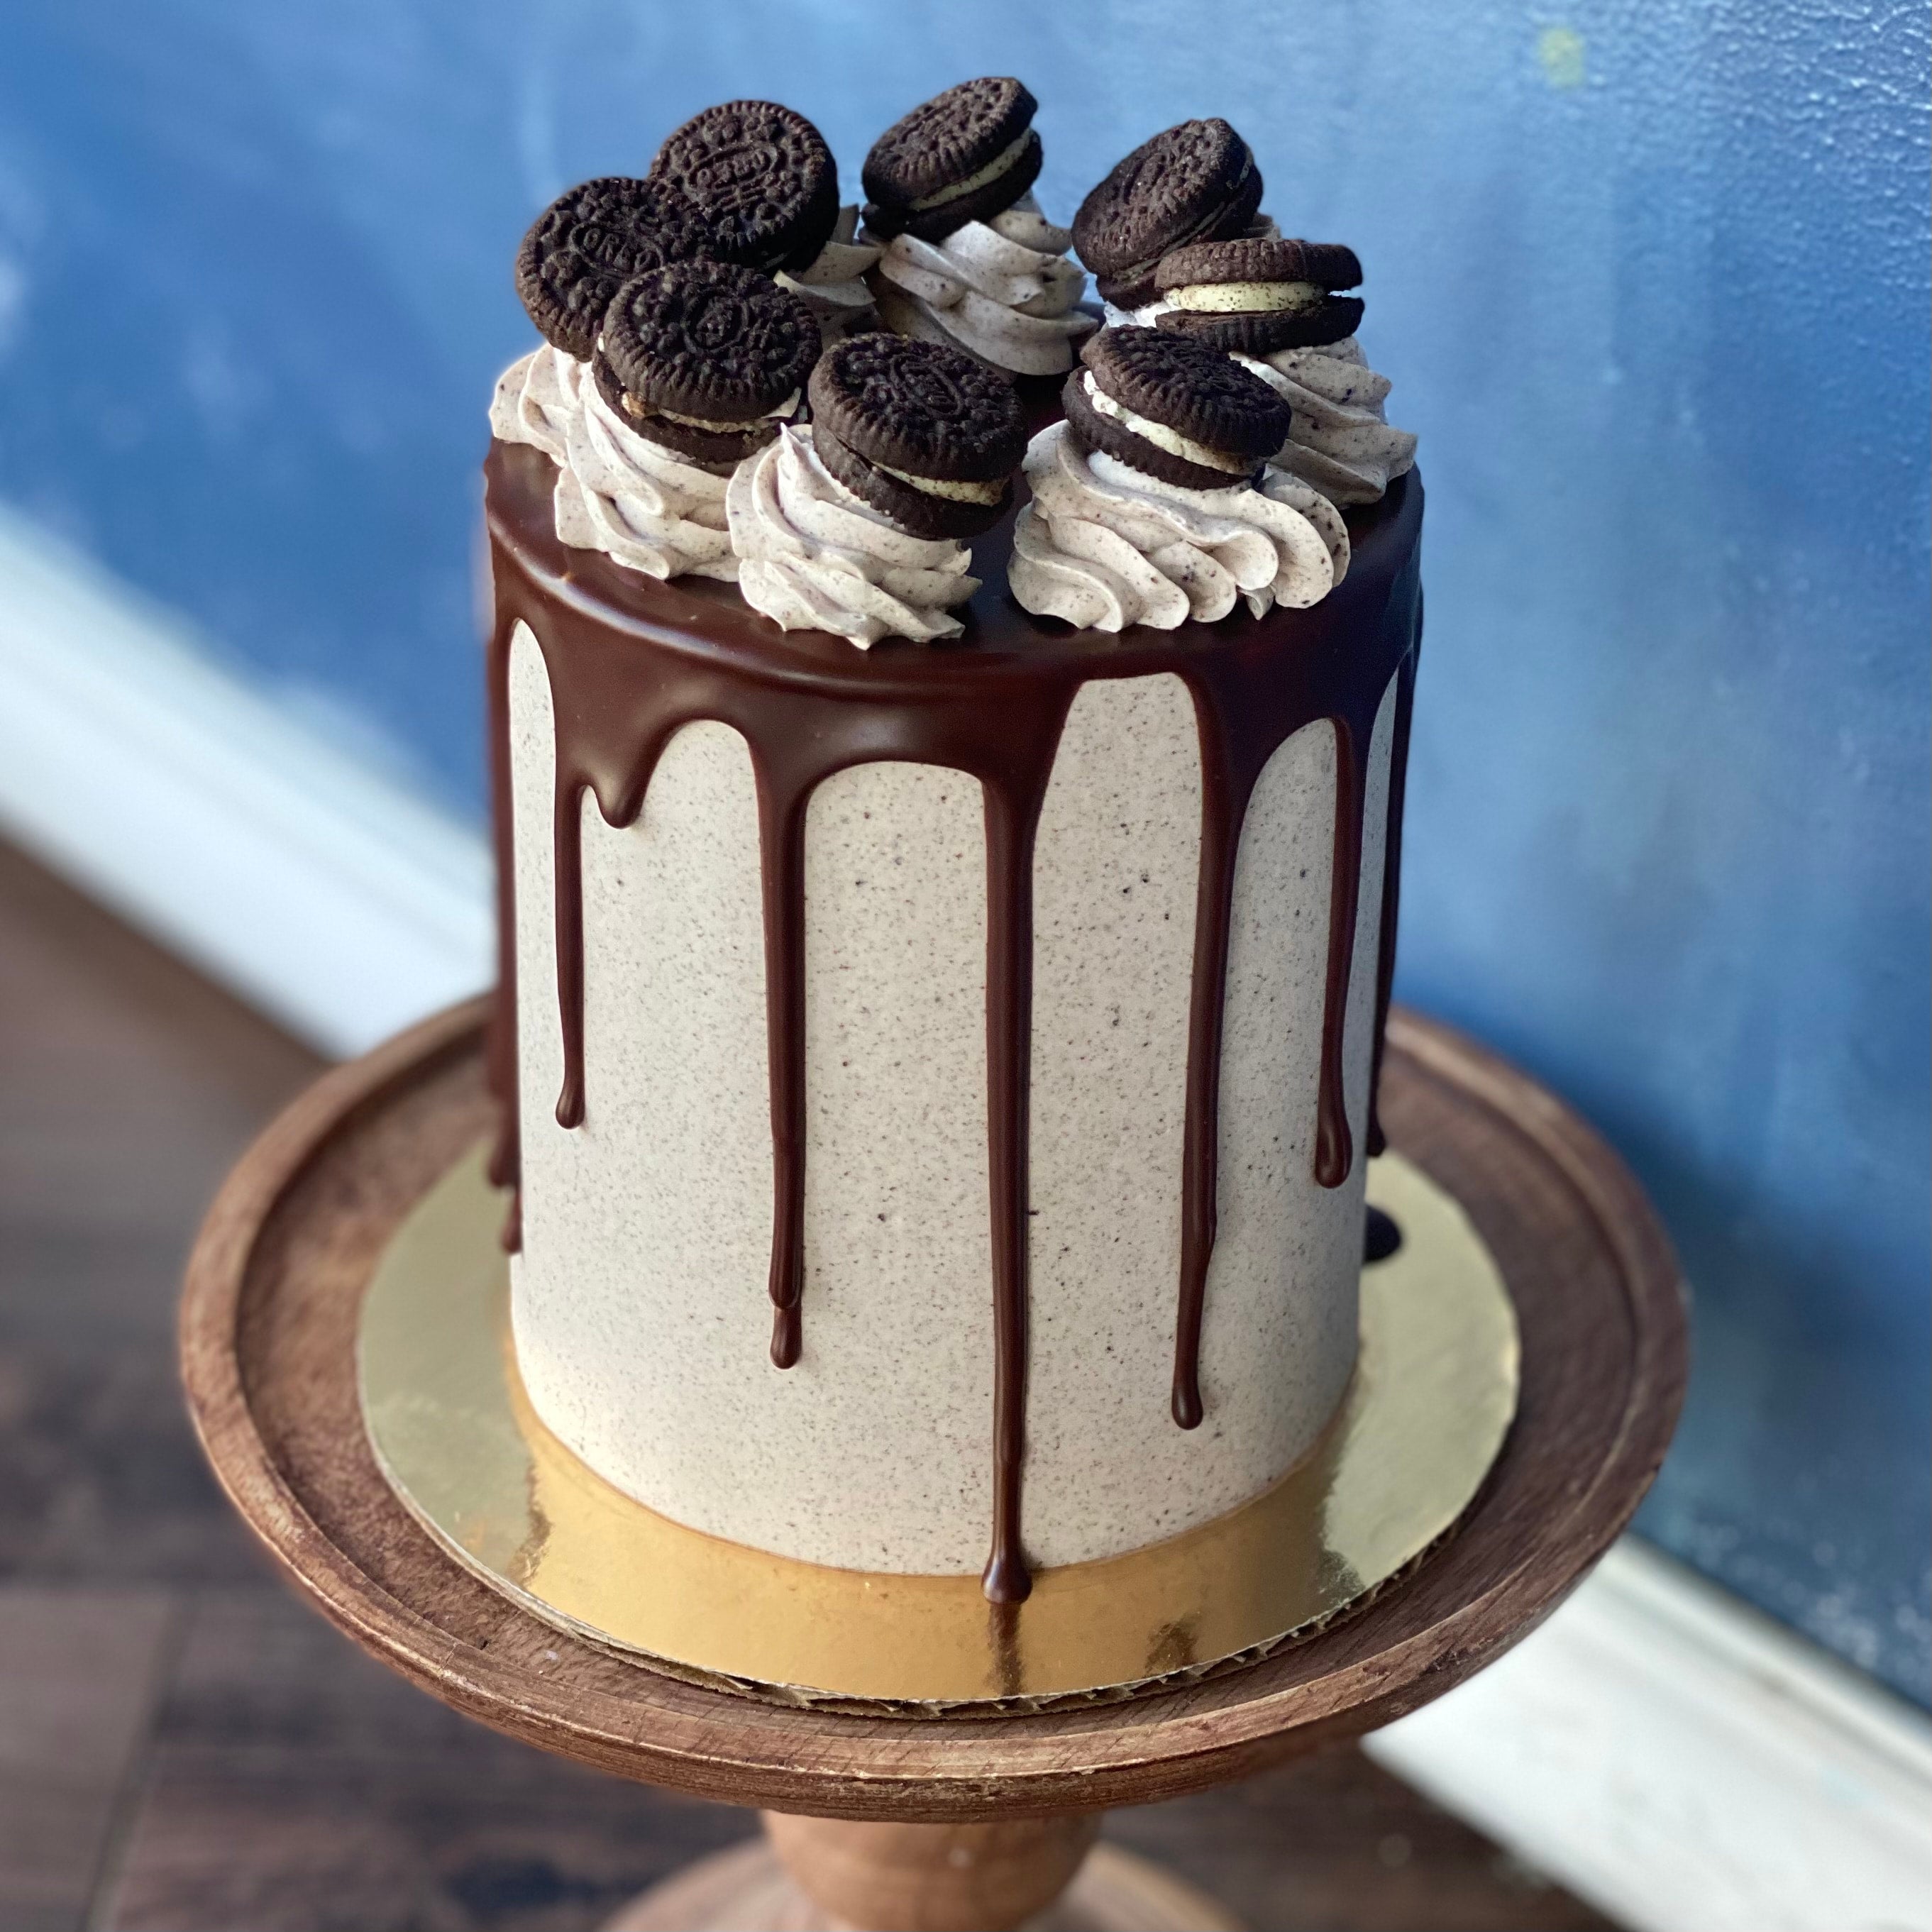 Decadent Chocolate Drip Cake- Next Day Delivery | Patisserie Valerie